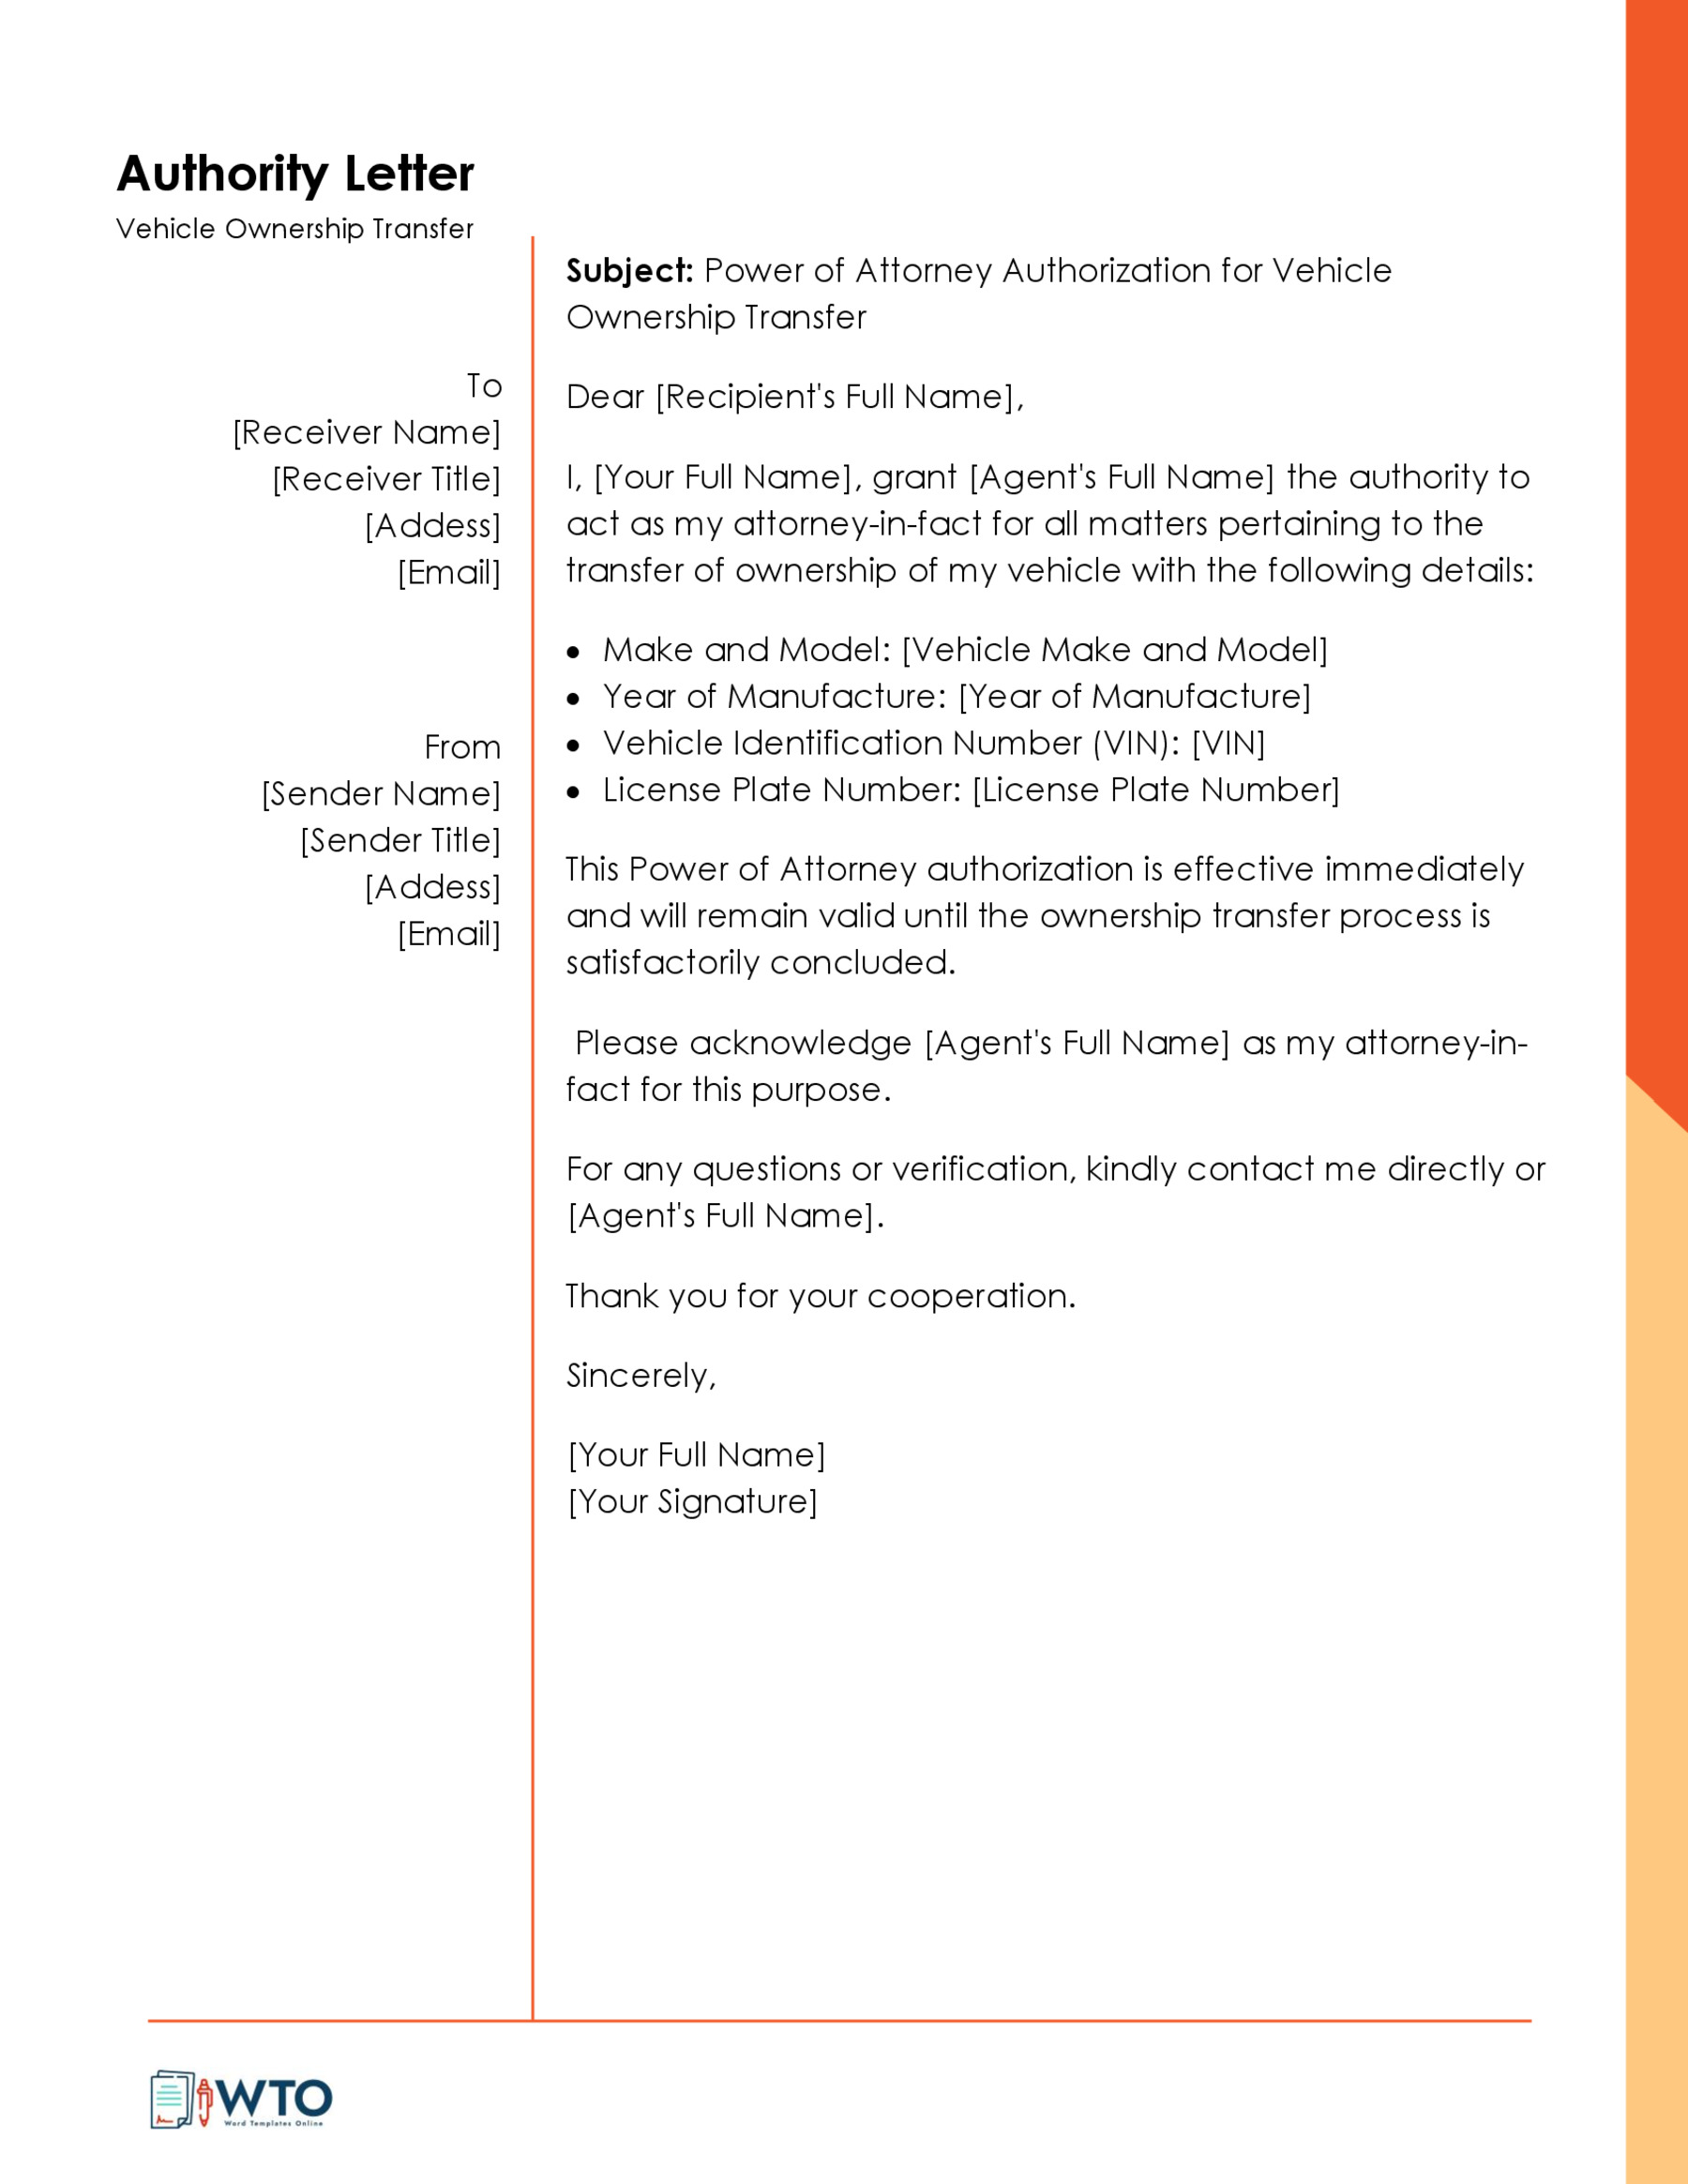 Authorization Letter Transfer Vehicle Ownership Letter Template- Free in Ms word